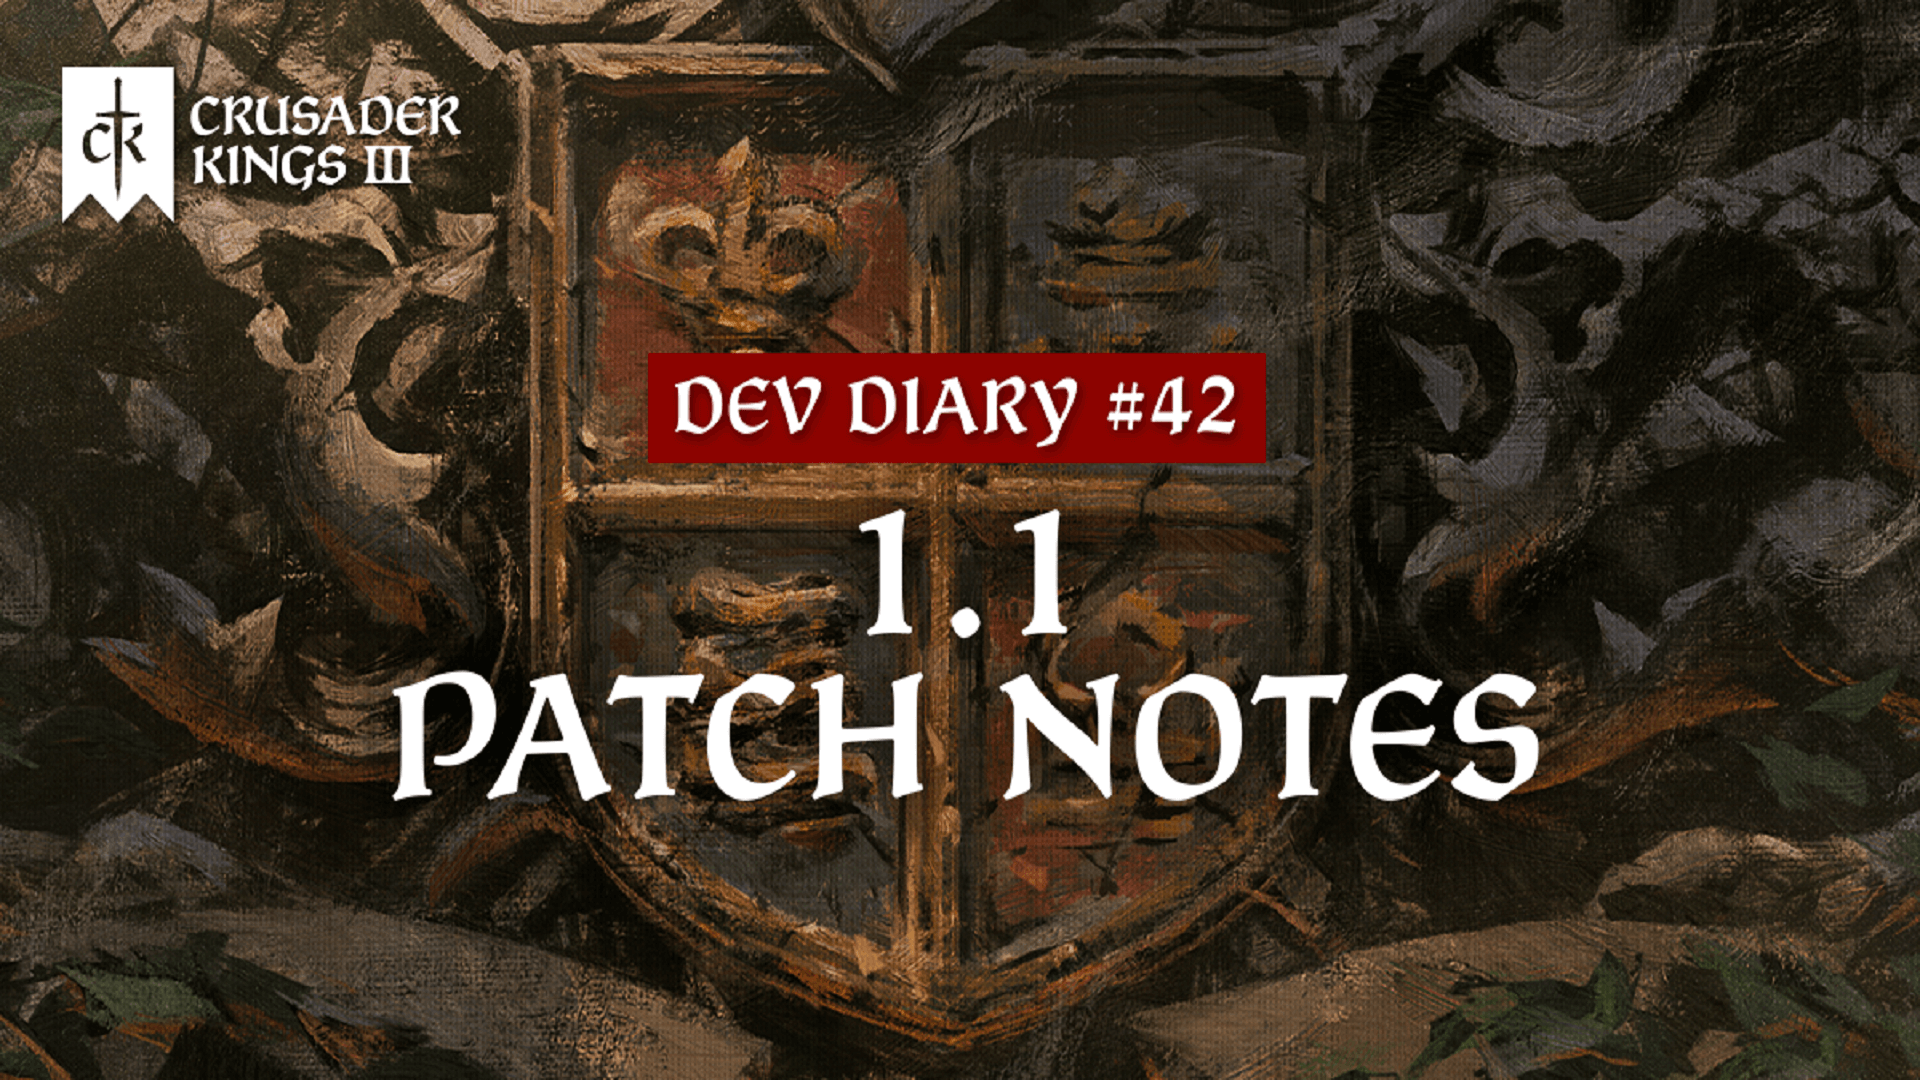 Crusader Kings 3 Patch Notes